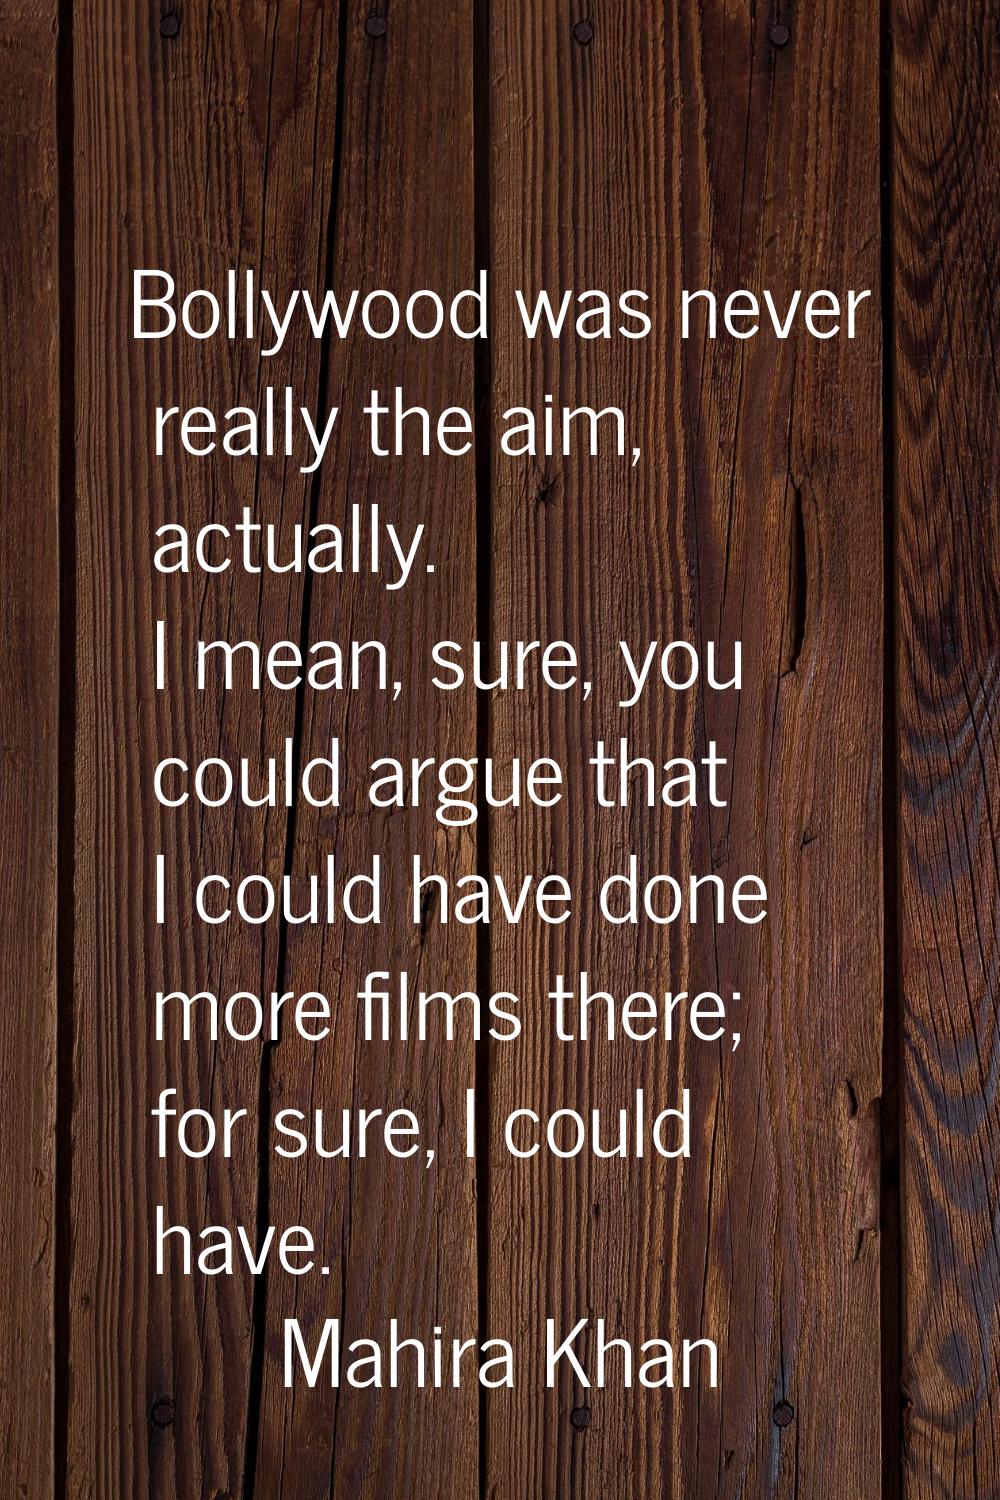 Bollywood was never really the aim, actually. I mean, sure, you could argue that I could have done 